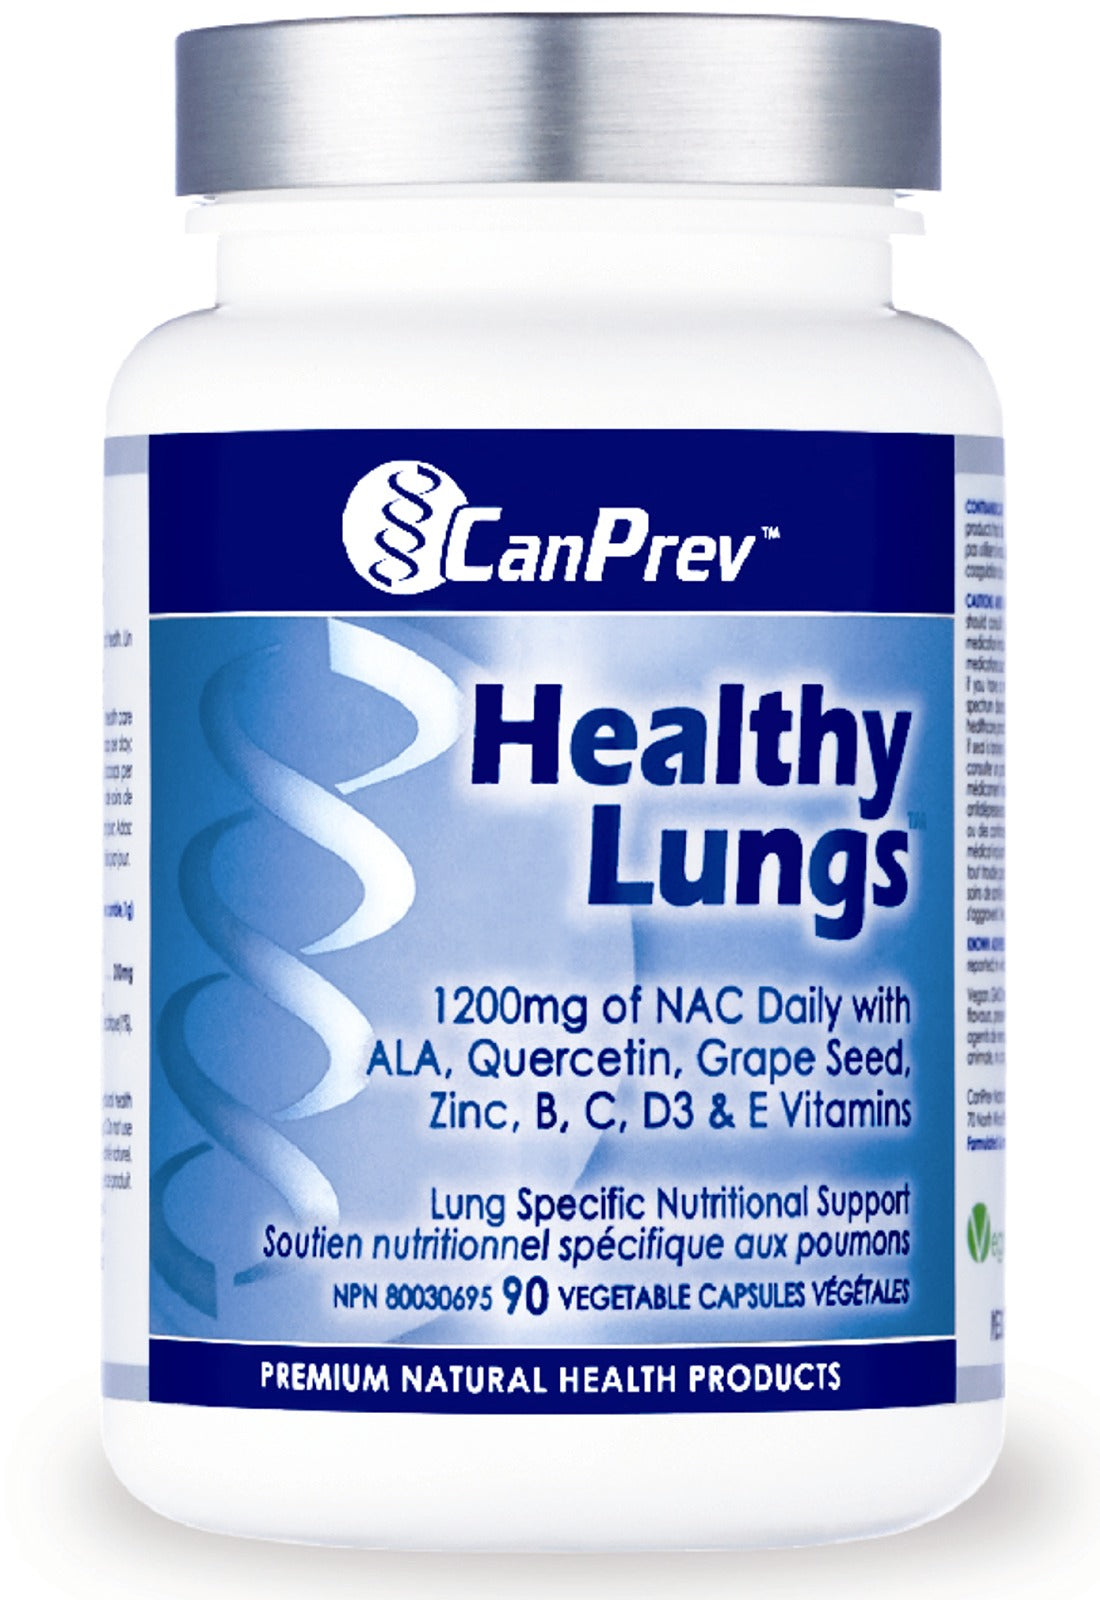 HEALTHY LUNG 60 CAPS CAN PREV